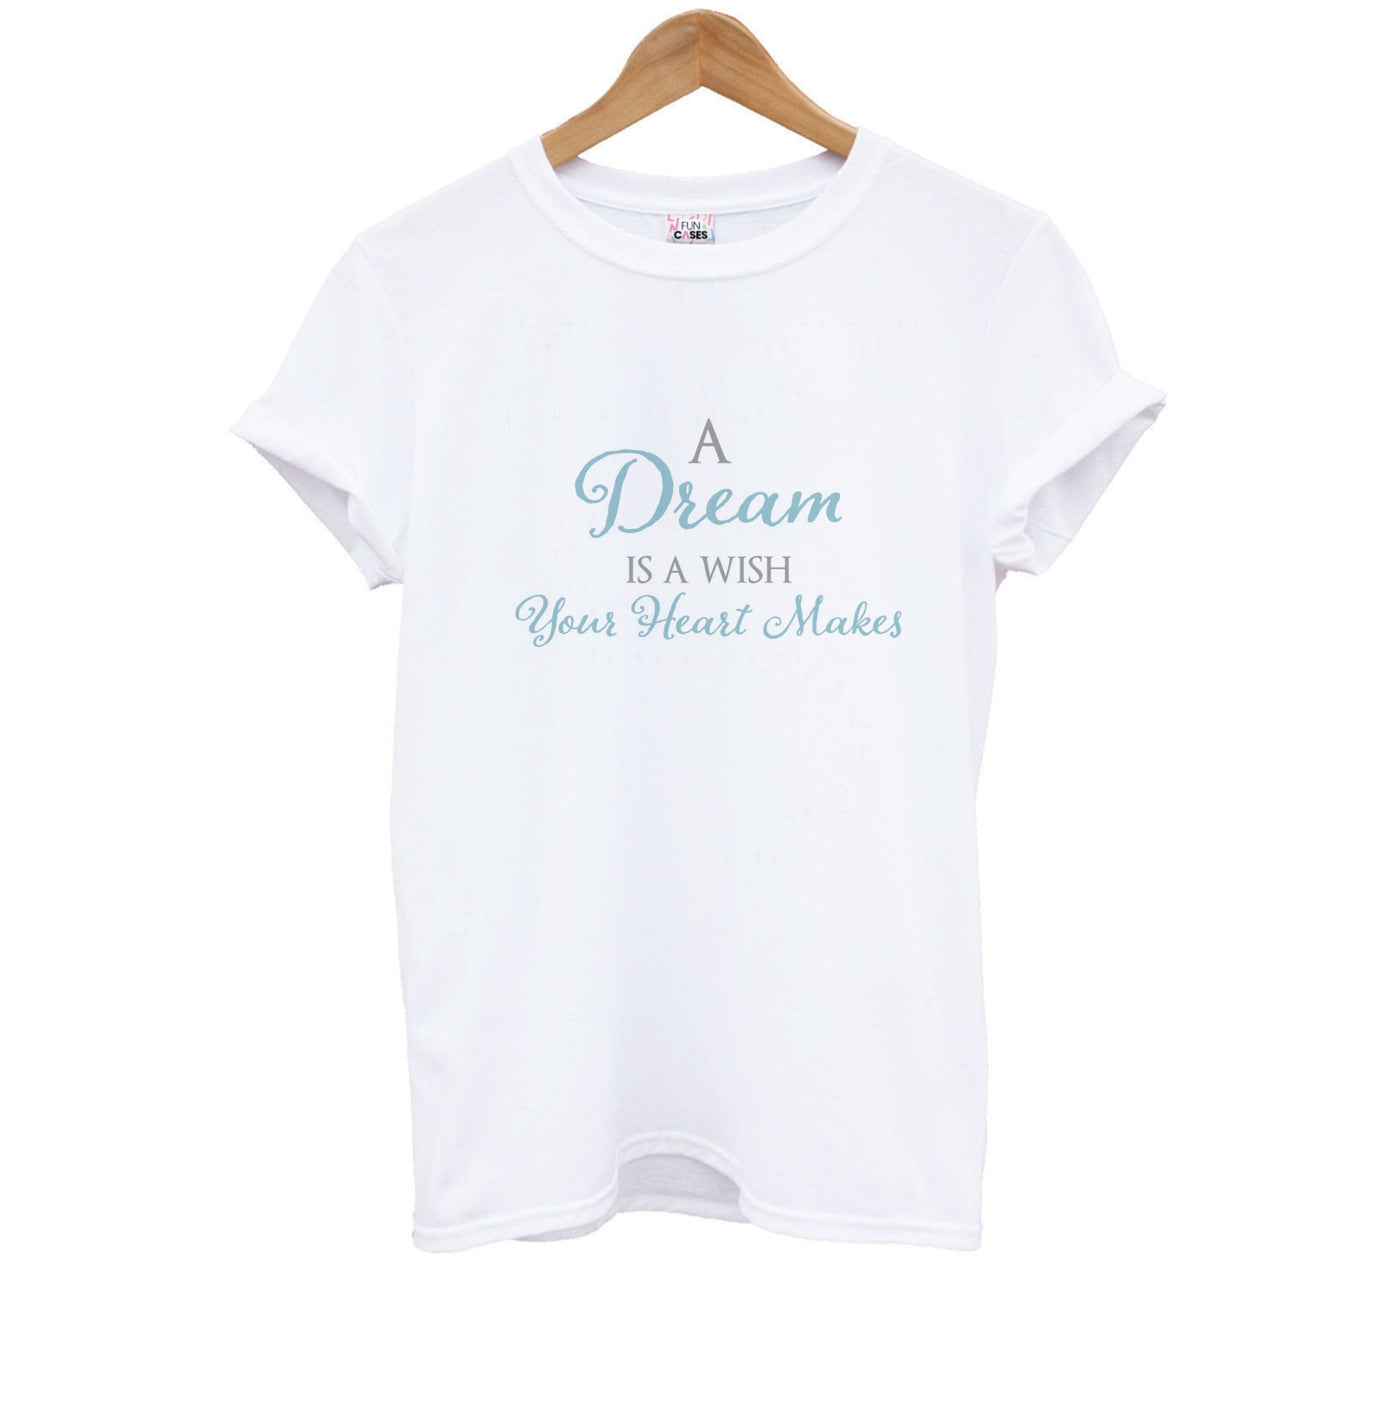 A Dream Is A Wish Your Heart Makes - Disney Kids T-Shirt